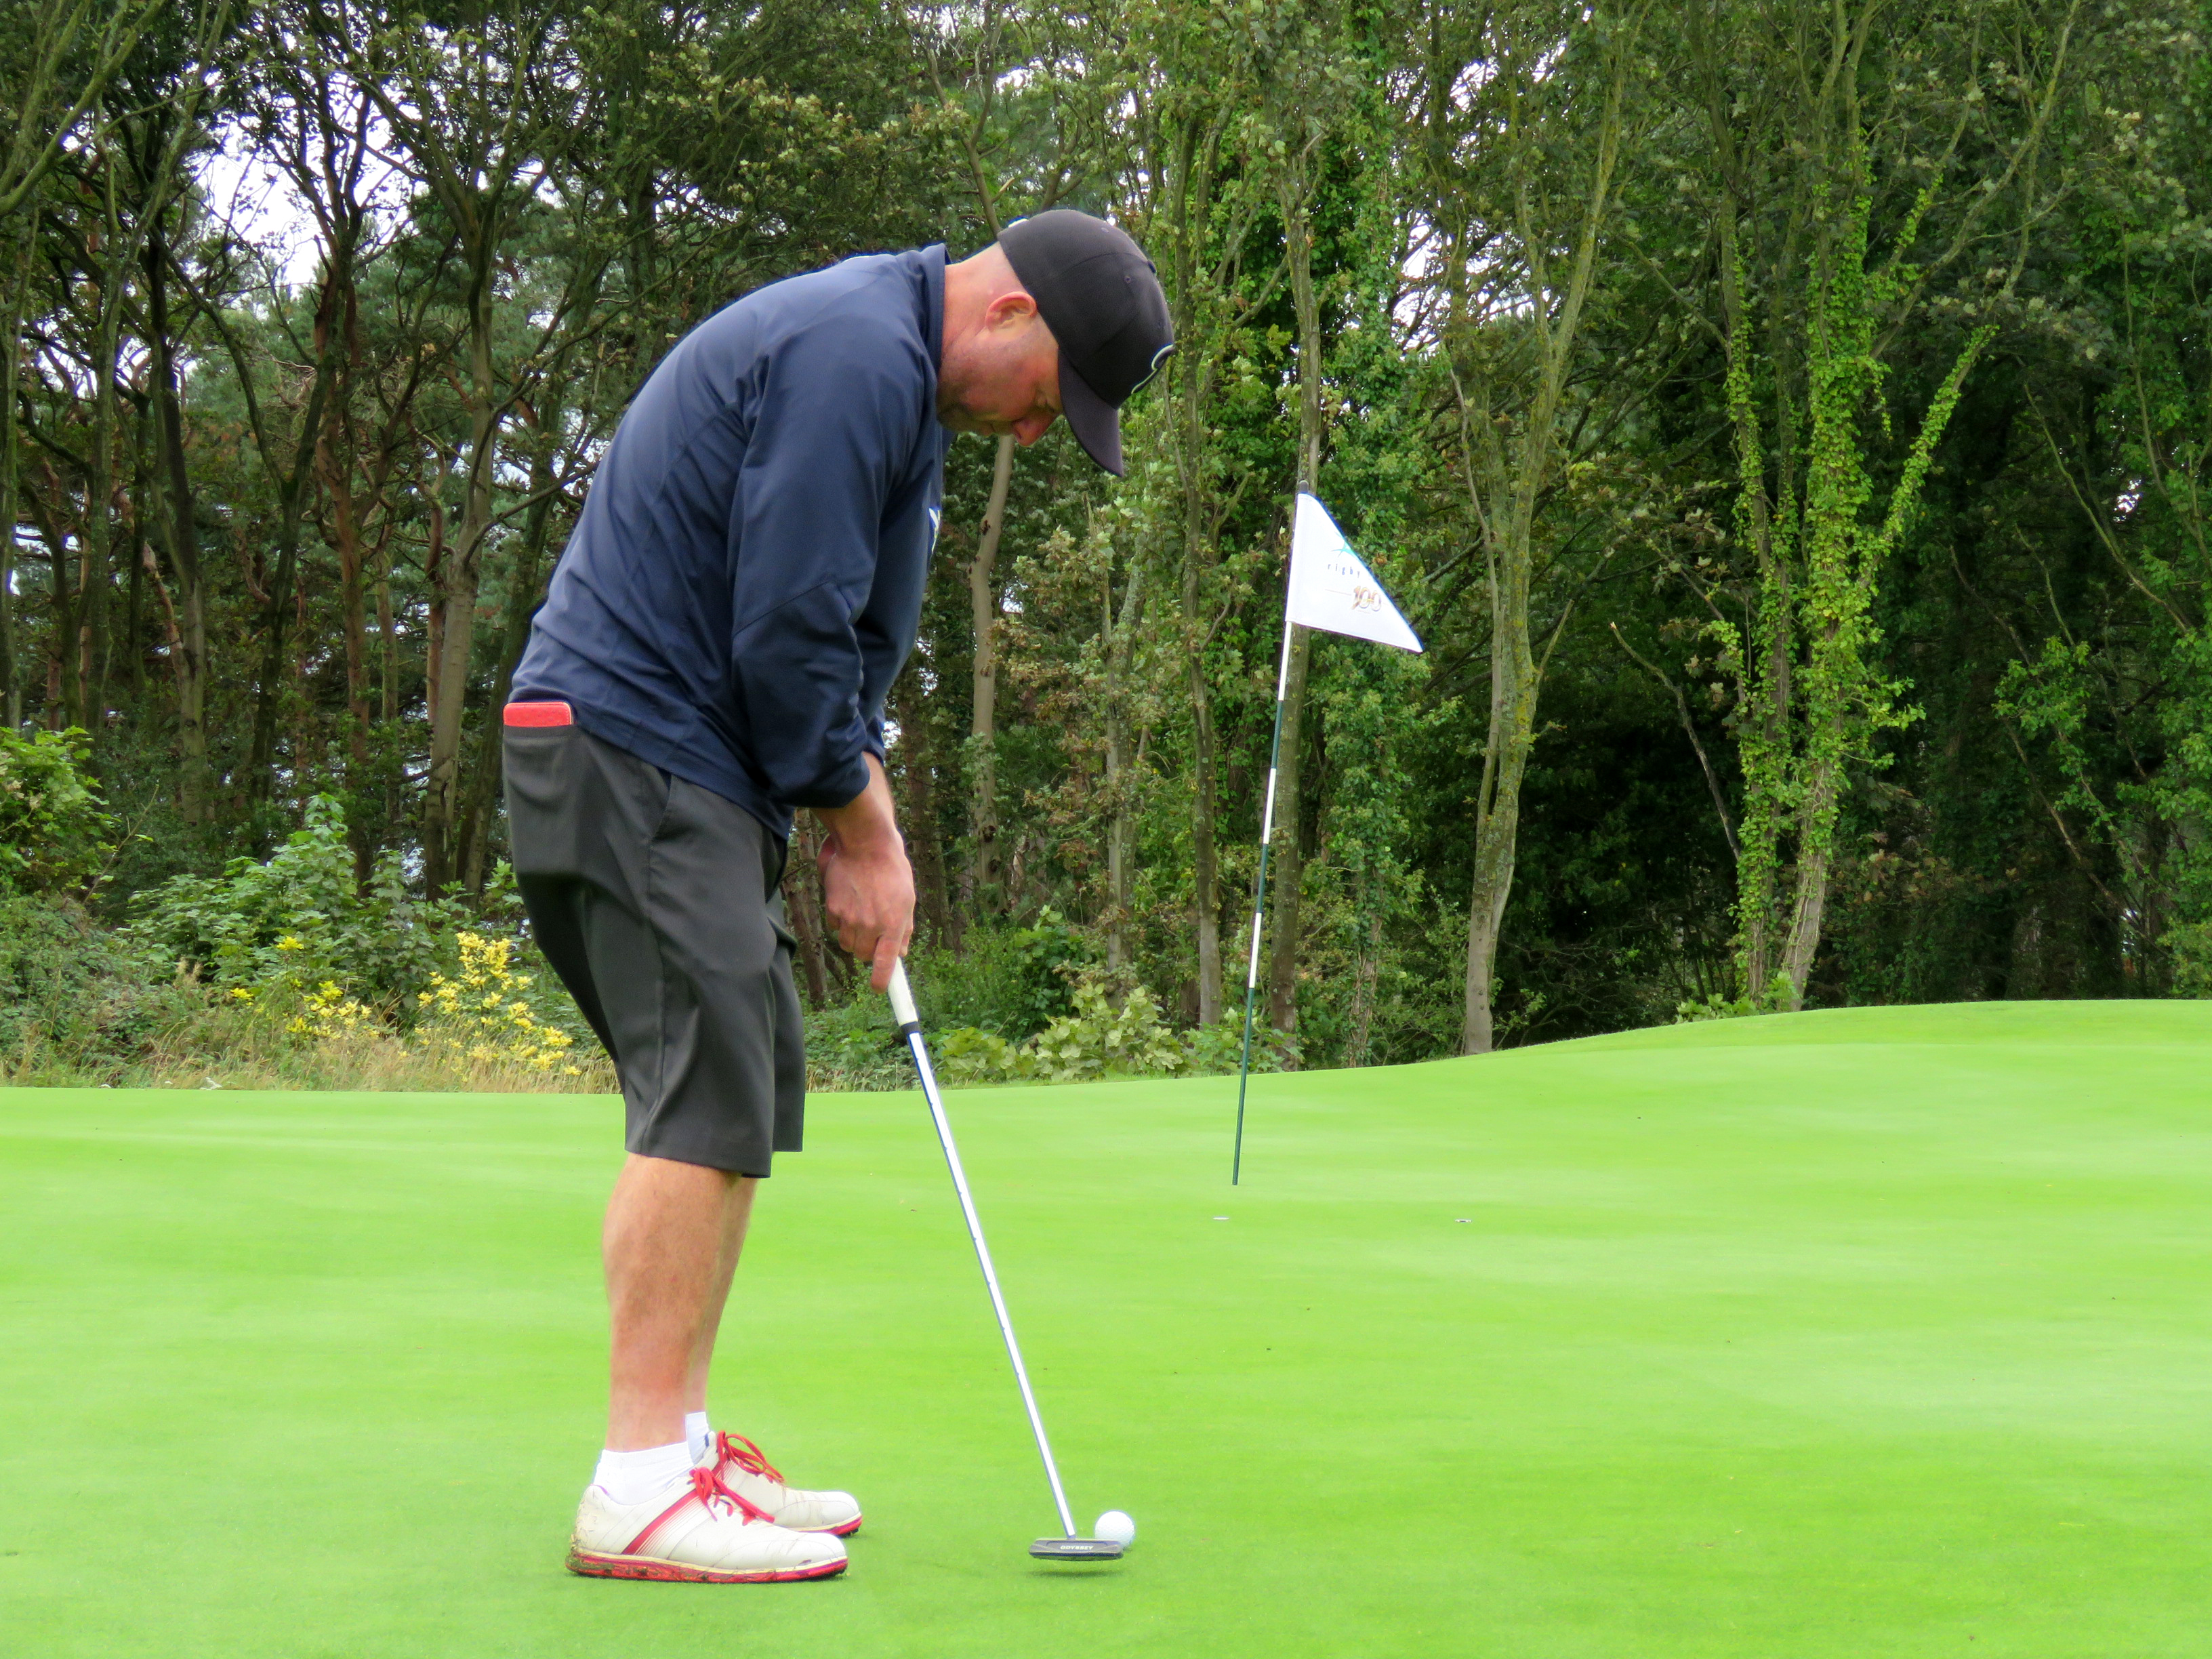 Golf course manager on golfers putting with flag in: It's a gimmick!